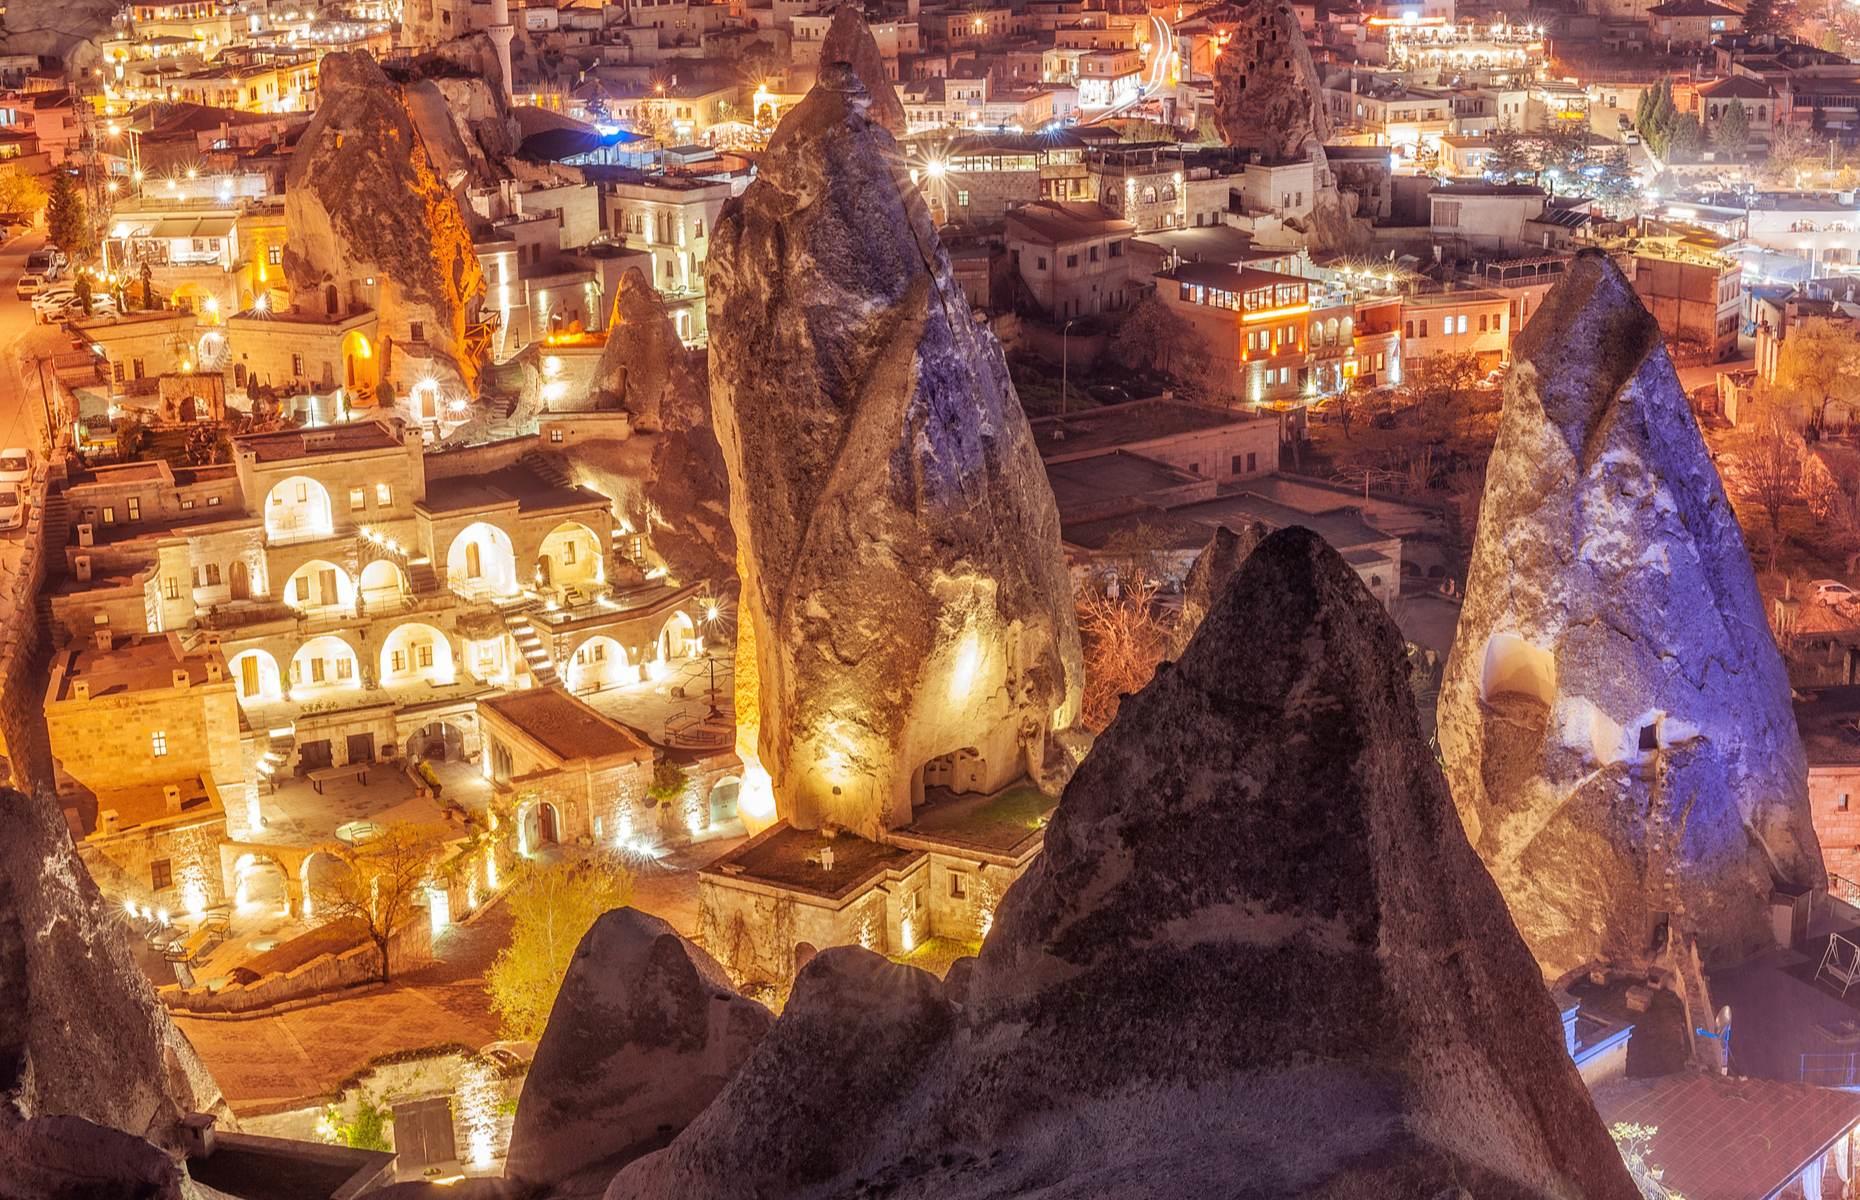 Twinkling like a box of precious gemstones by night, the cave buildings of Göreme certainly have a magical feel. Parts of this UNESCO World Heritage settlement were hewn into the rock as early as the 4th century, when small anchorite communities began to carve out cells to live in. Many of its cave churches began to be decorated elaborately between the 10th and 12th centuries and today they’re filled with colorful figurative paintings.